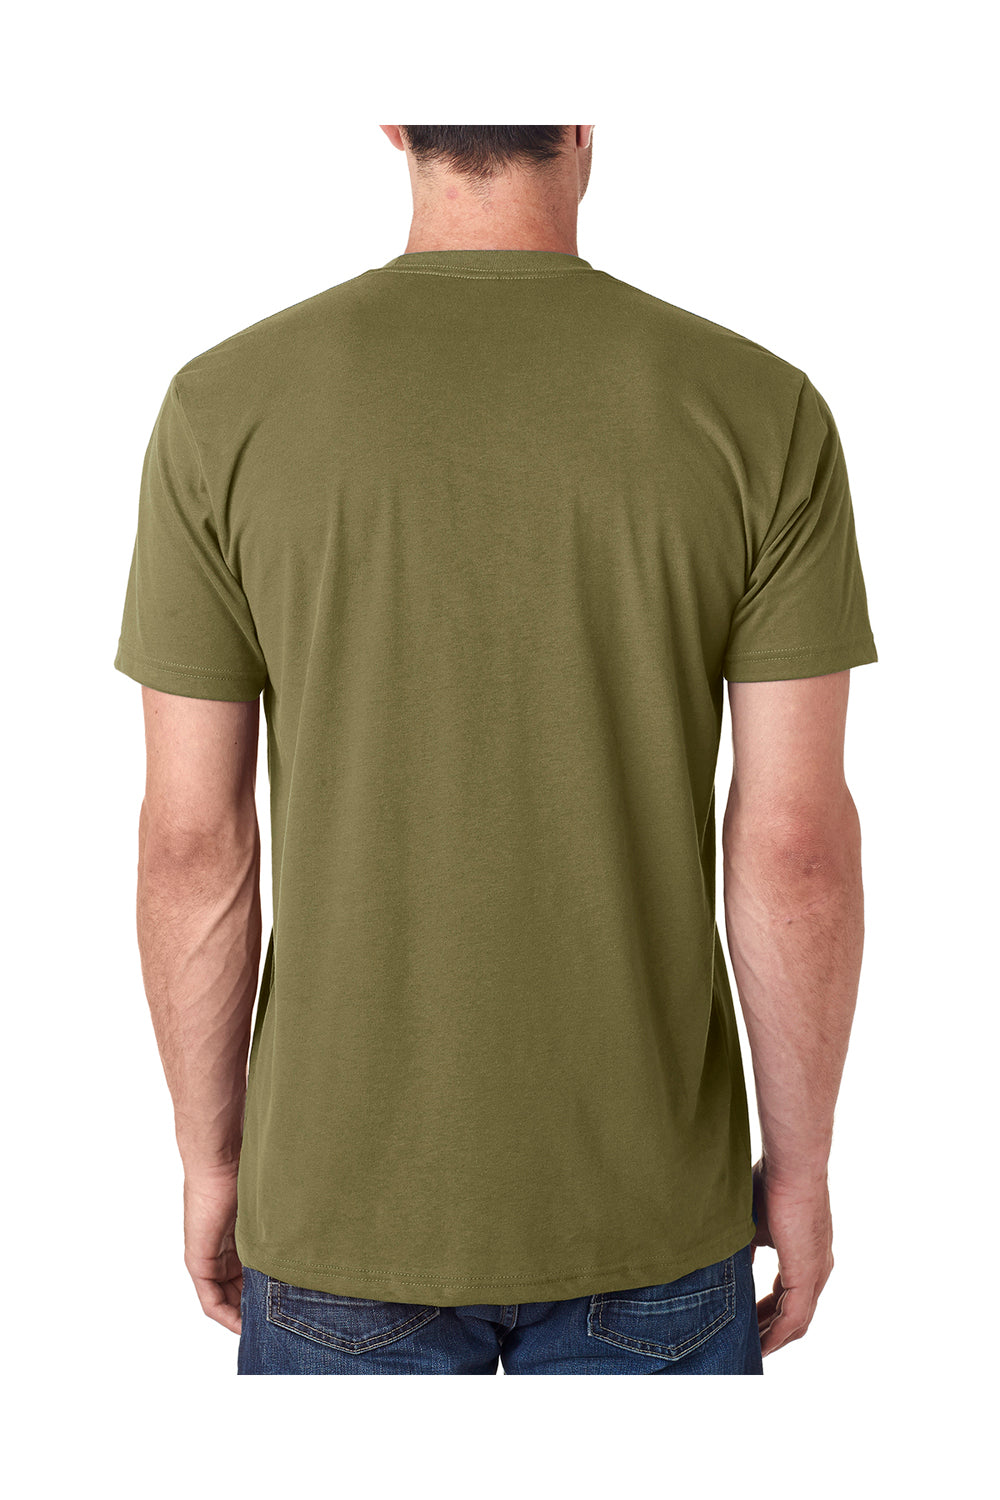 Next Level 6410 Mens Sueded Jersey Short Sleeve Crewneck T-Shirt Military Green Back